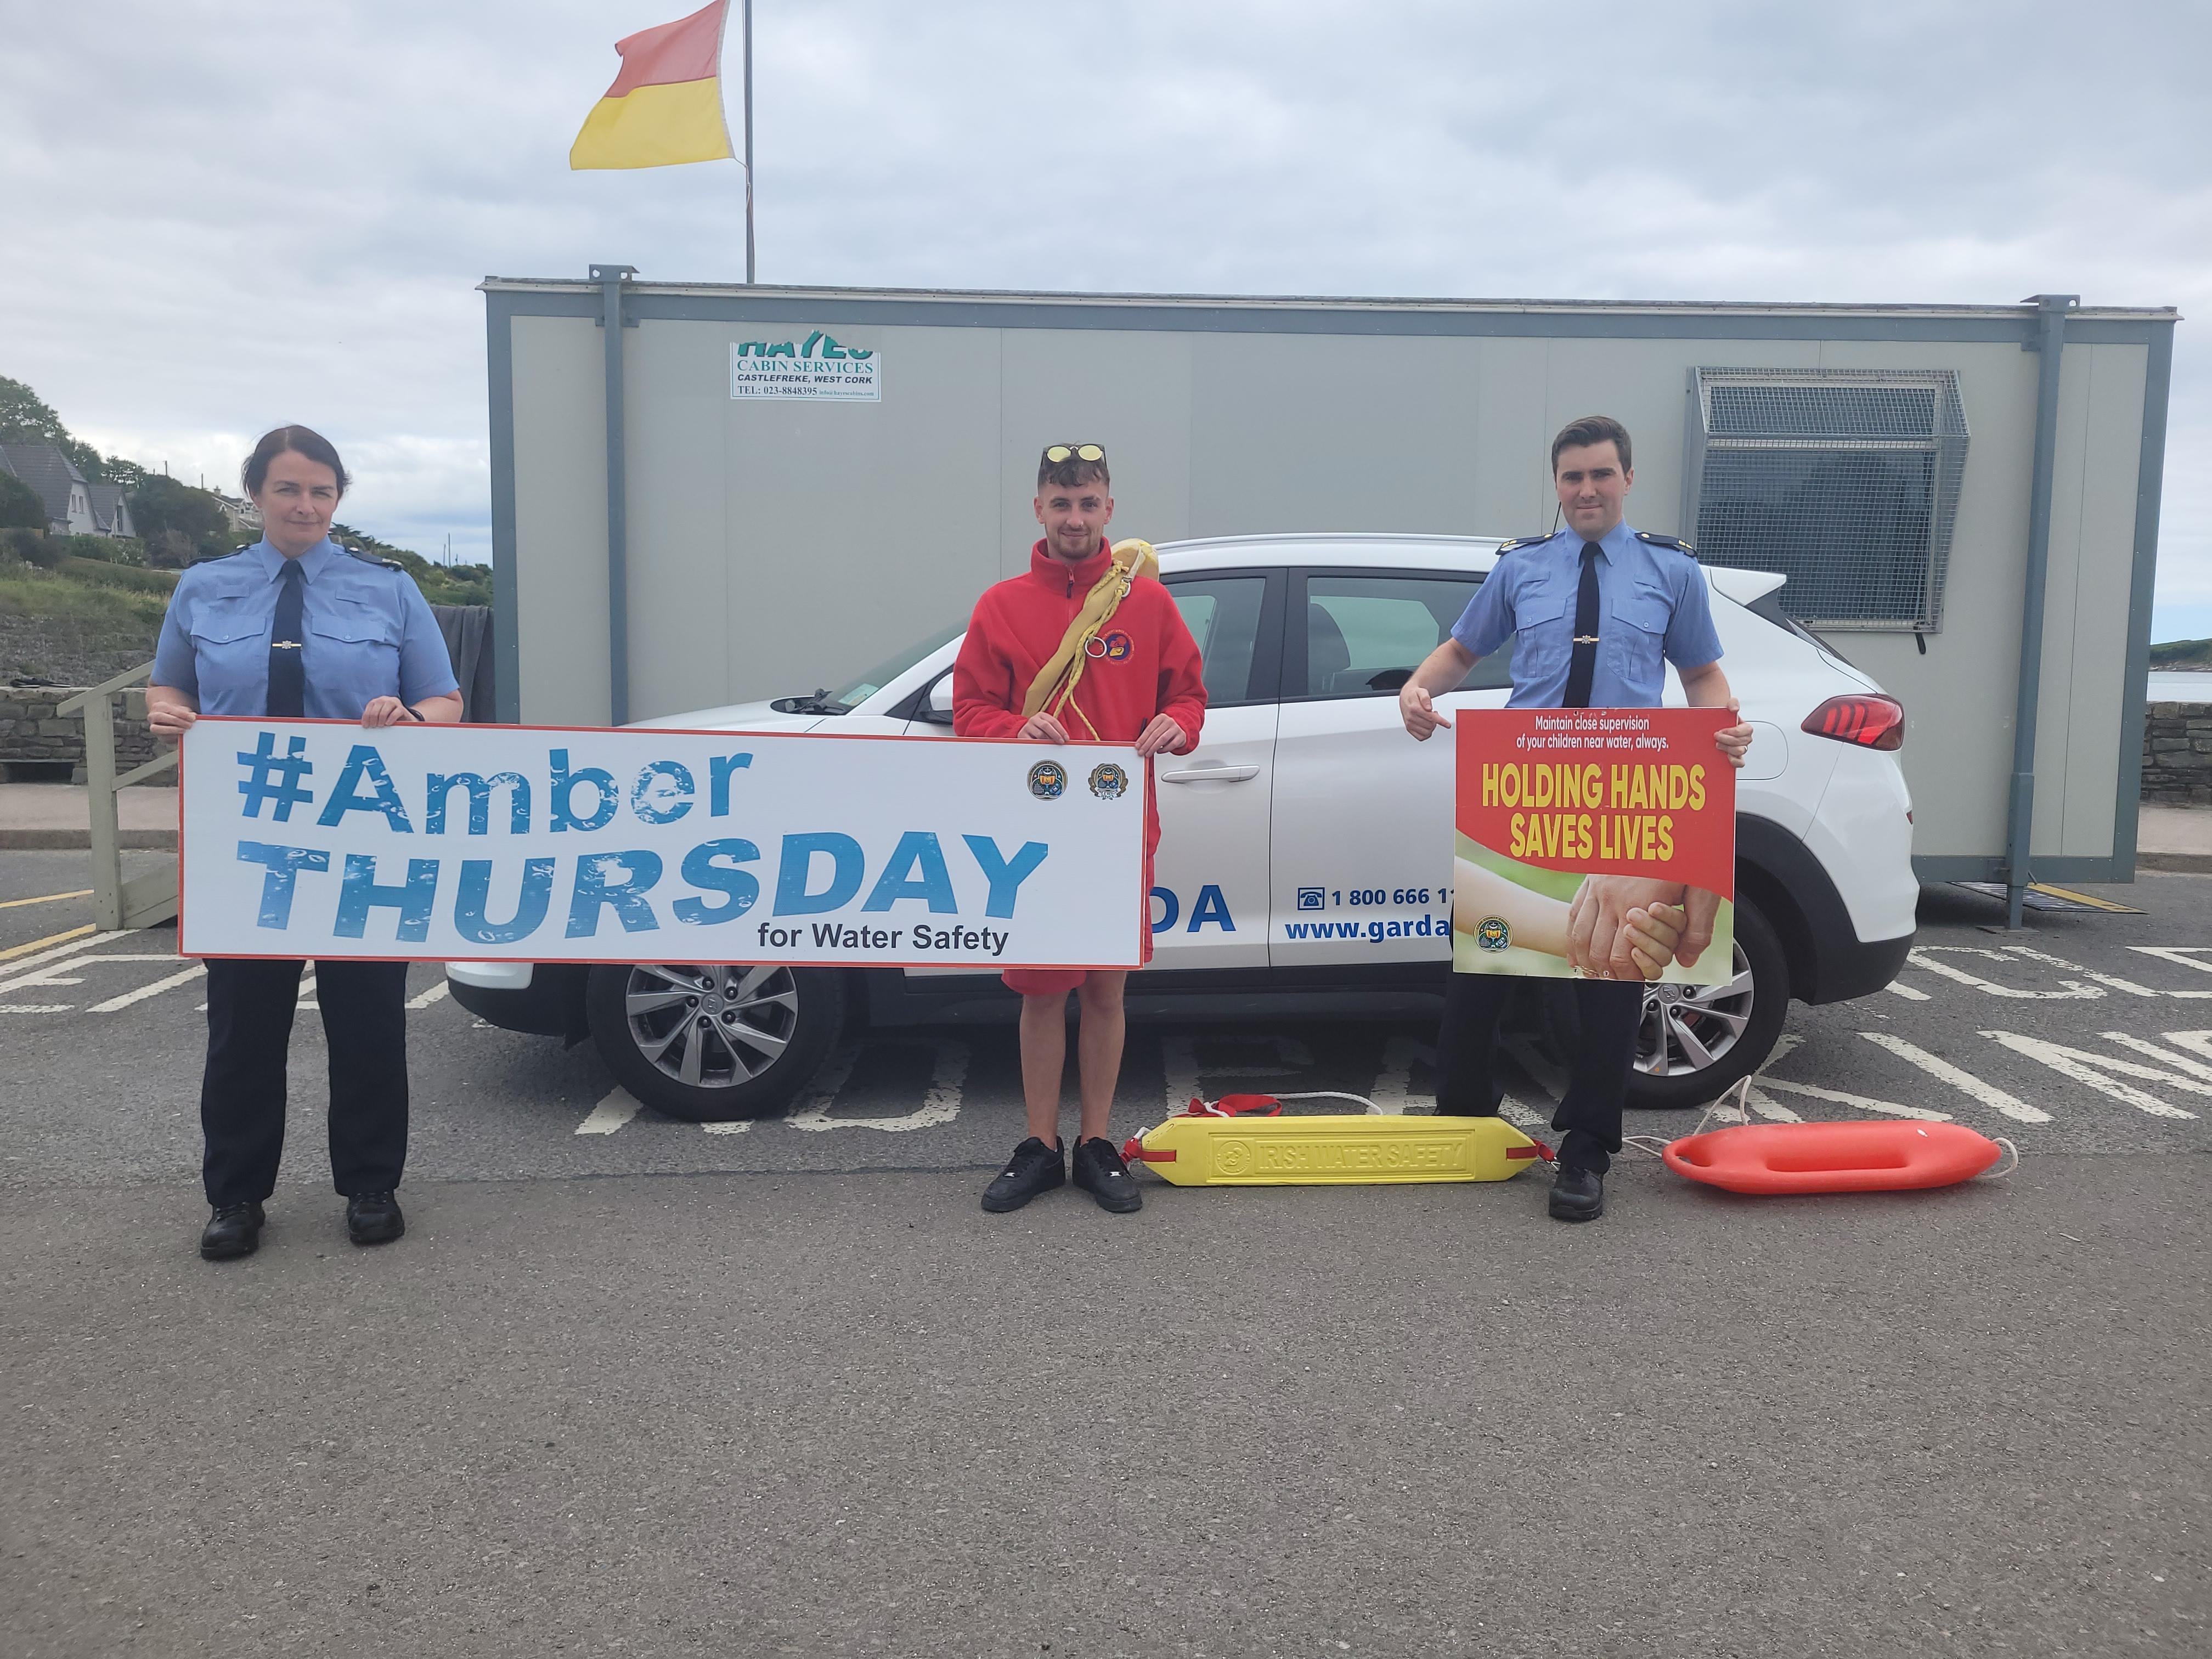 A lifegaurd and two Gardaí holding signs promoting amber thursday